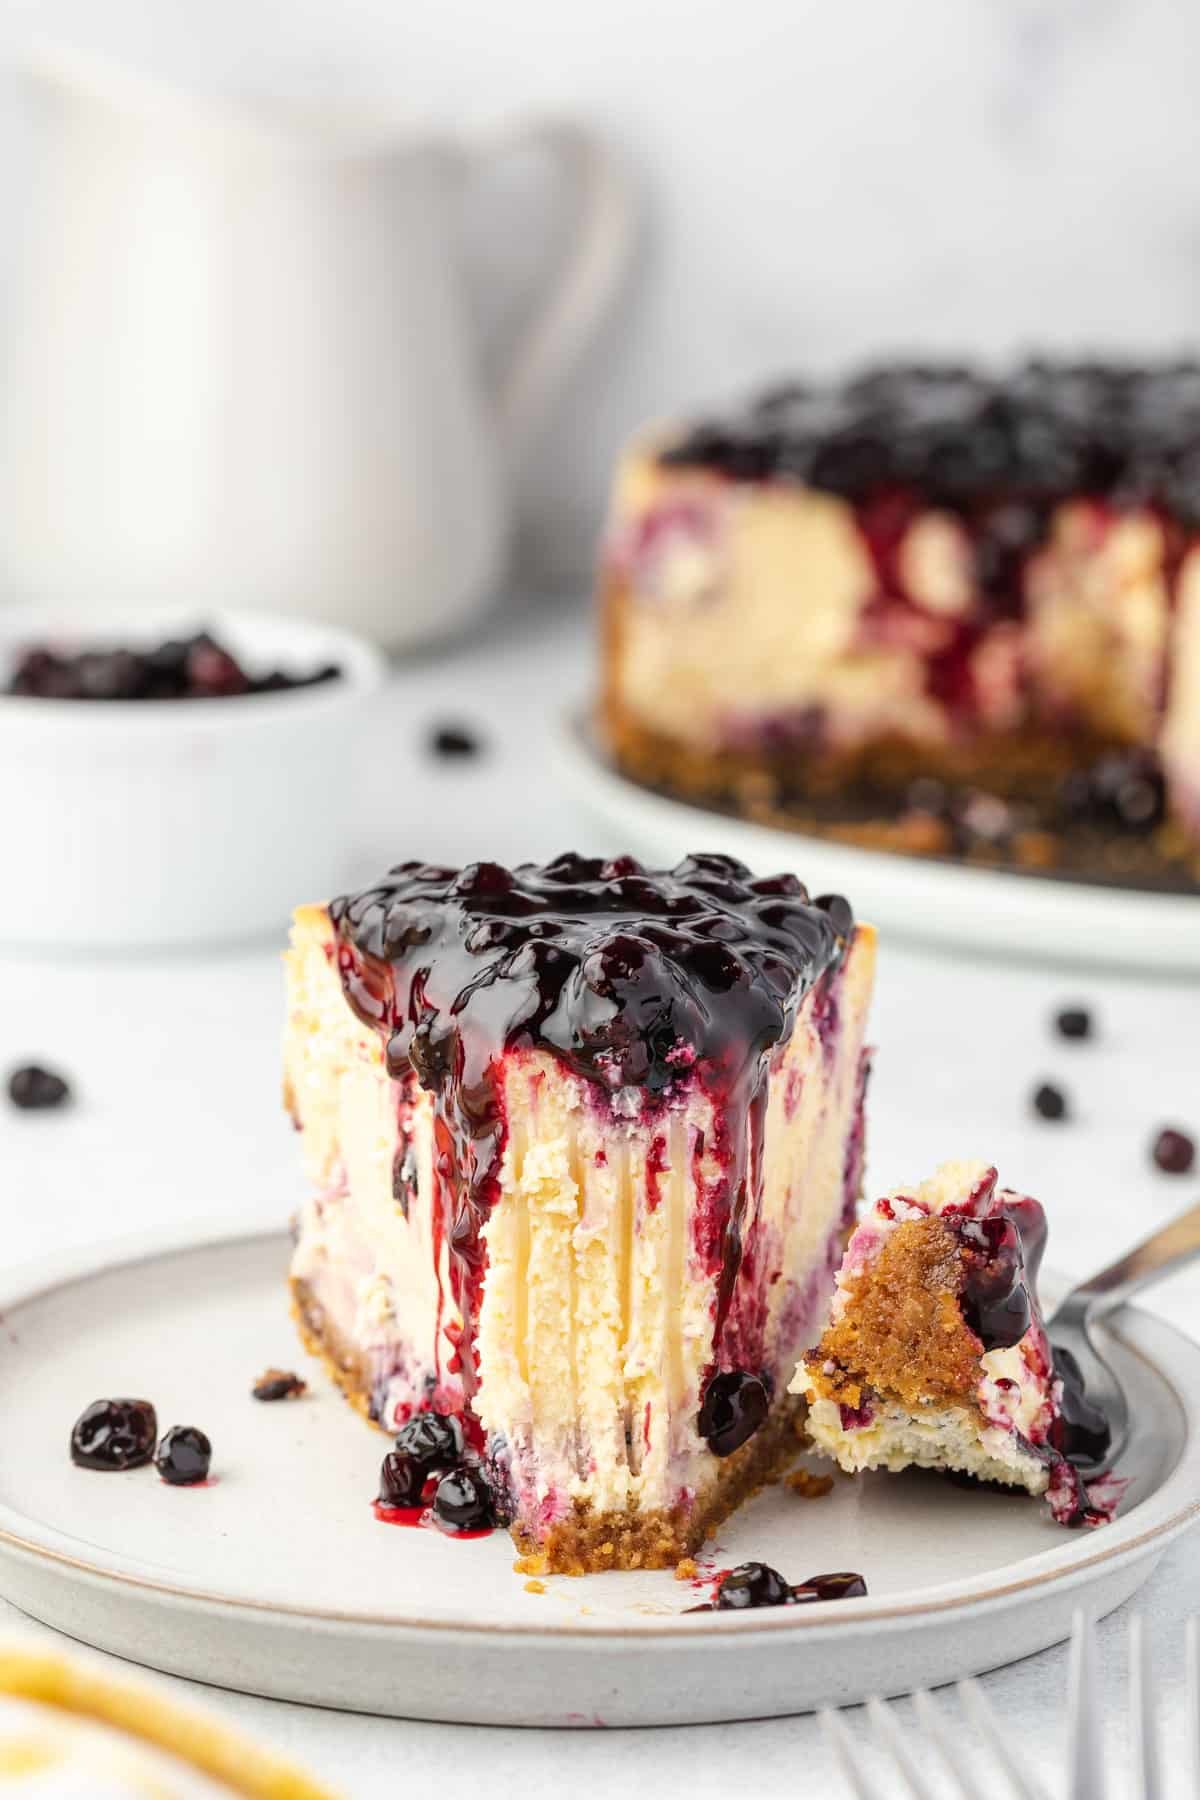 Slice of cheesecake on a plate with bite on a fork, whole cheesecake and bowl of huckleberries in background.